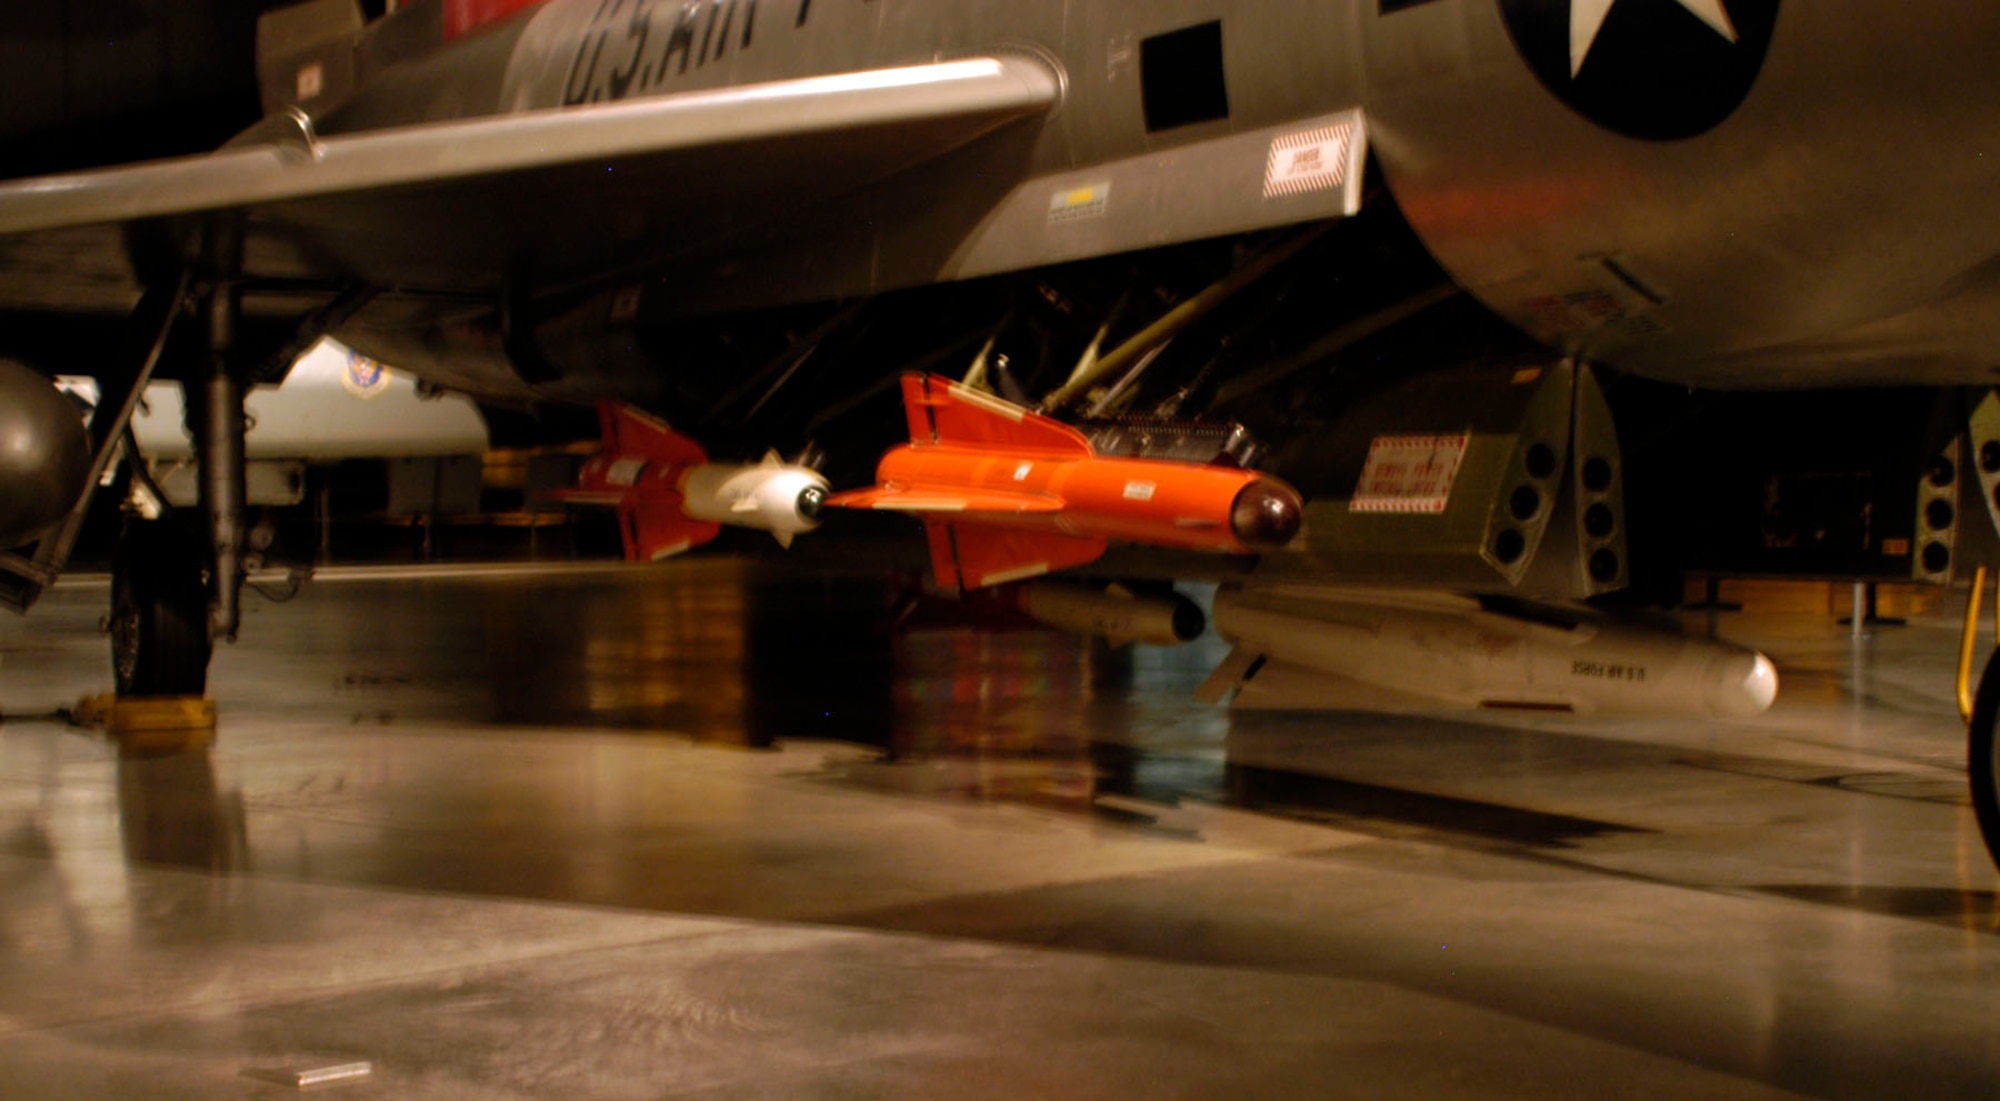 DAYTON, Ohio - Armament on the F-102 in the Cold War Gallery at the National Museum of the U.S. Air Force. (U.S. Air Force photo)